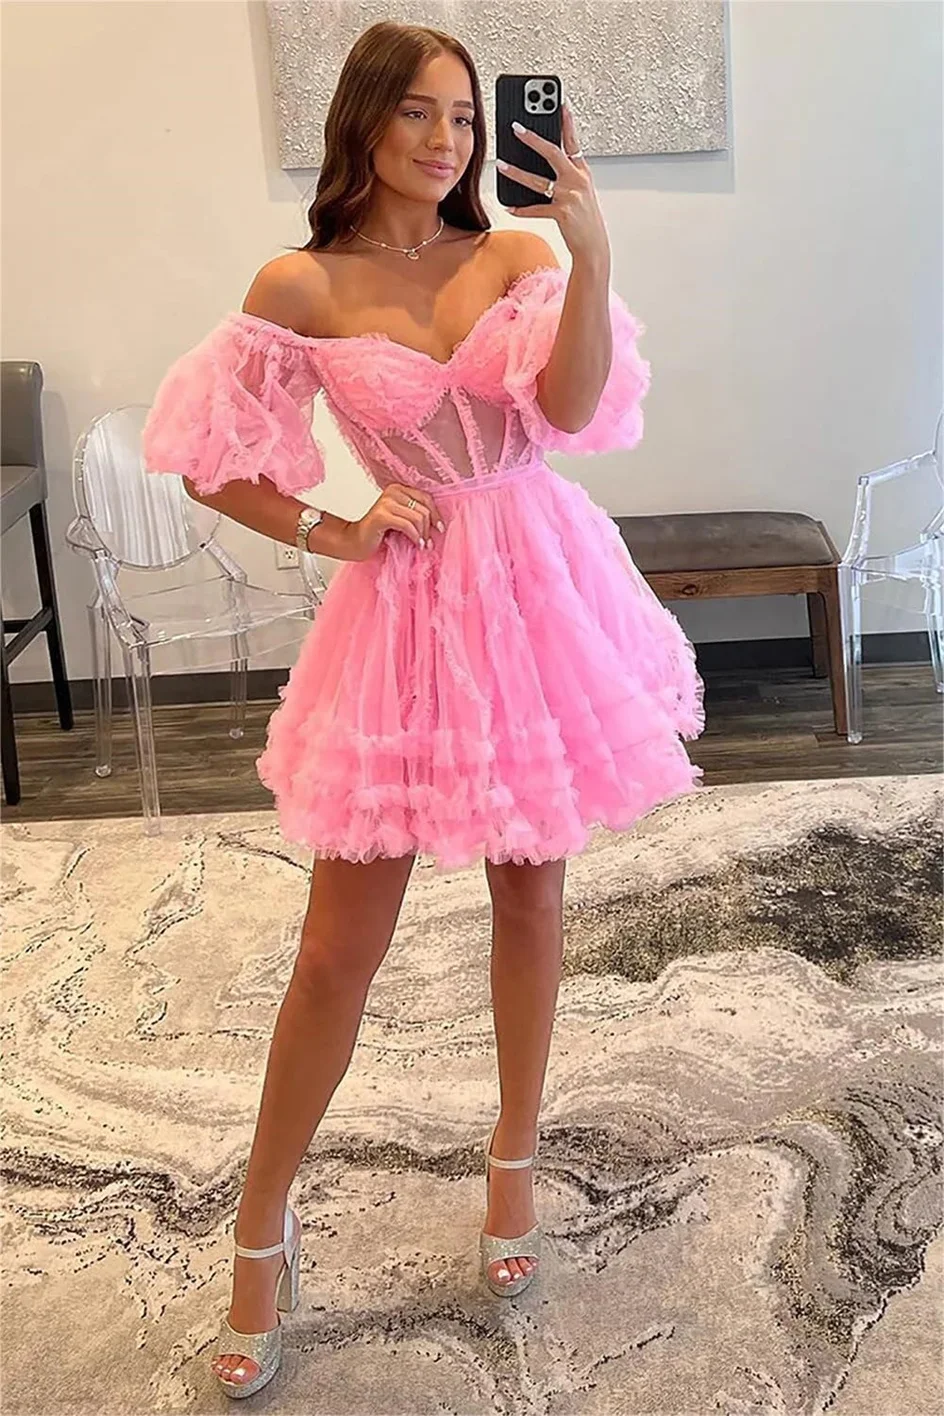 

Sweetheart Mini Tulle Homecoming Dresses Short Puffy Sleeves Prom Dress Tiered Evening Ruffles Cocktail Birthday Party Gowns